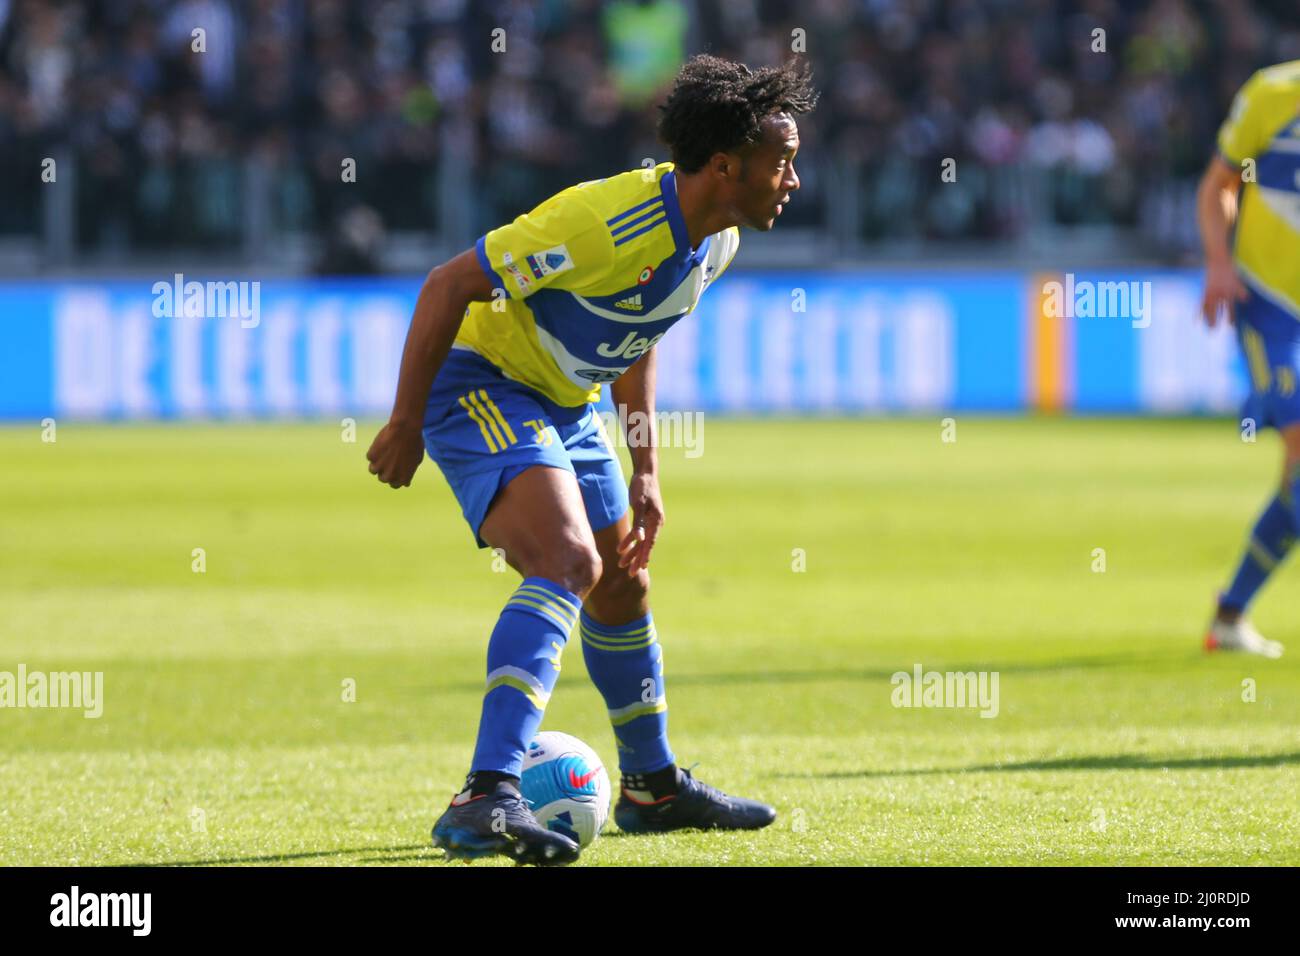 TURIN, ITALY. 20 MARCH 2022. Juan Cuadrado of Juventus FC during the match between Juventus FC and US Salernitana 1919 on March 20, 2022 at Allianz Stadium in Turin, Italy. Credit: Massimiliano Ferraro/Medialys Images/Alamy Live News Stock Photo